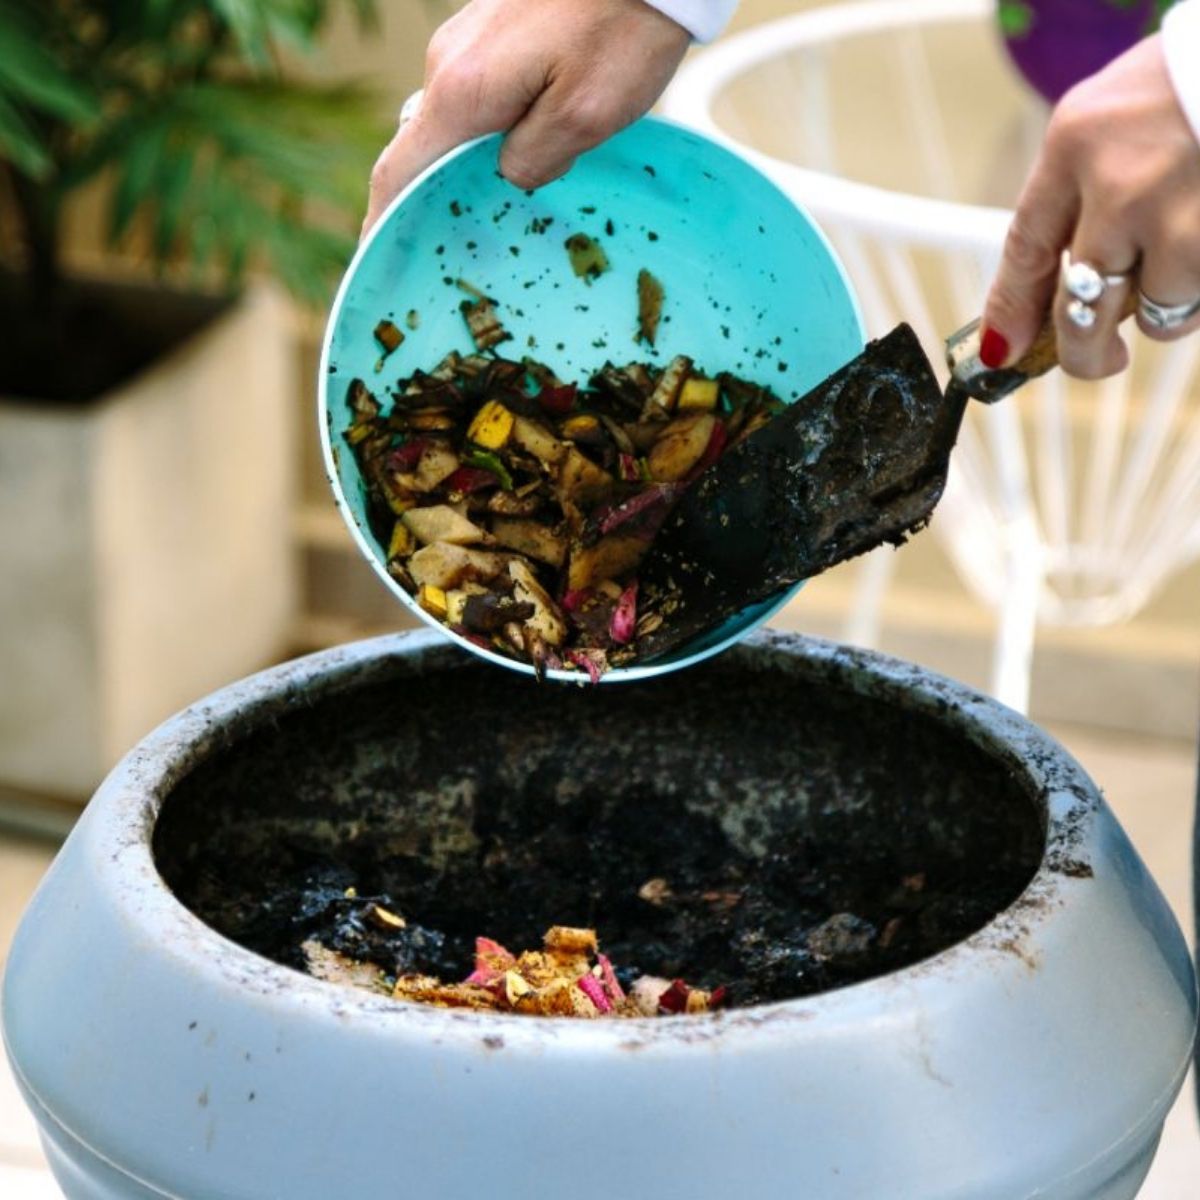 How to know when the bokashi pre-compost can be buried - Bokashi Living